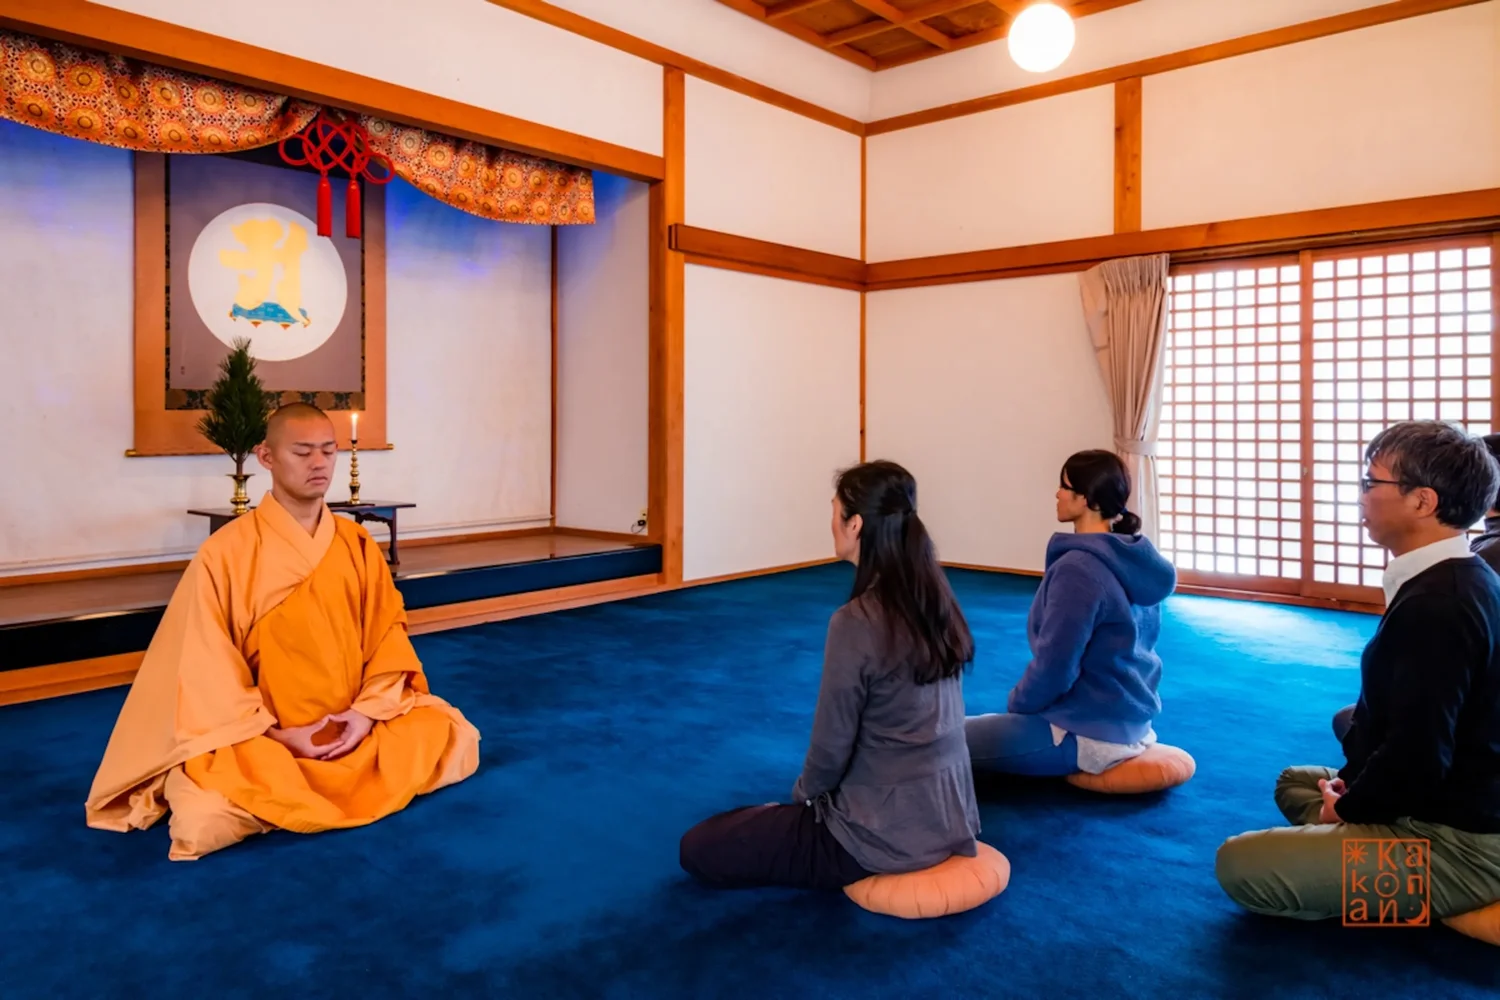 Buddhist Immersion: Spend a Day in the Life of a Monk on Mt. Koya